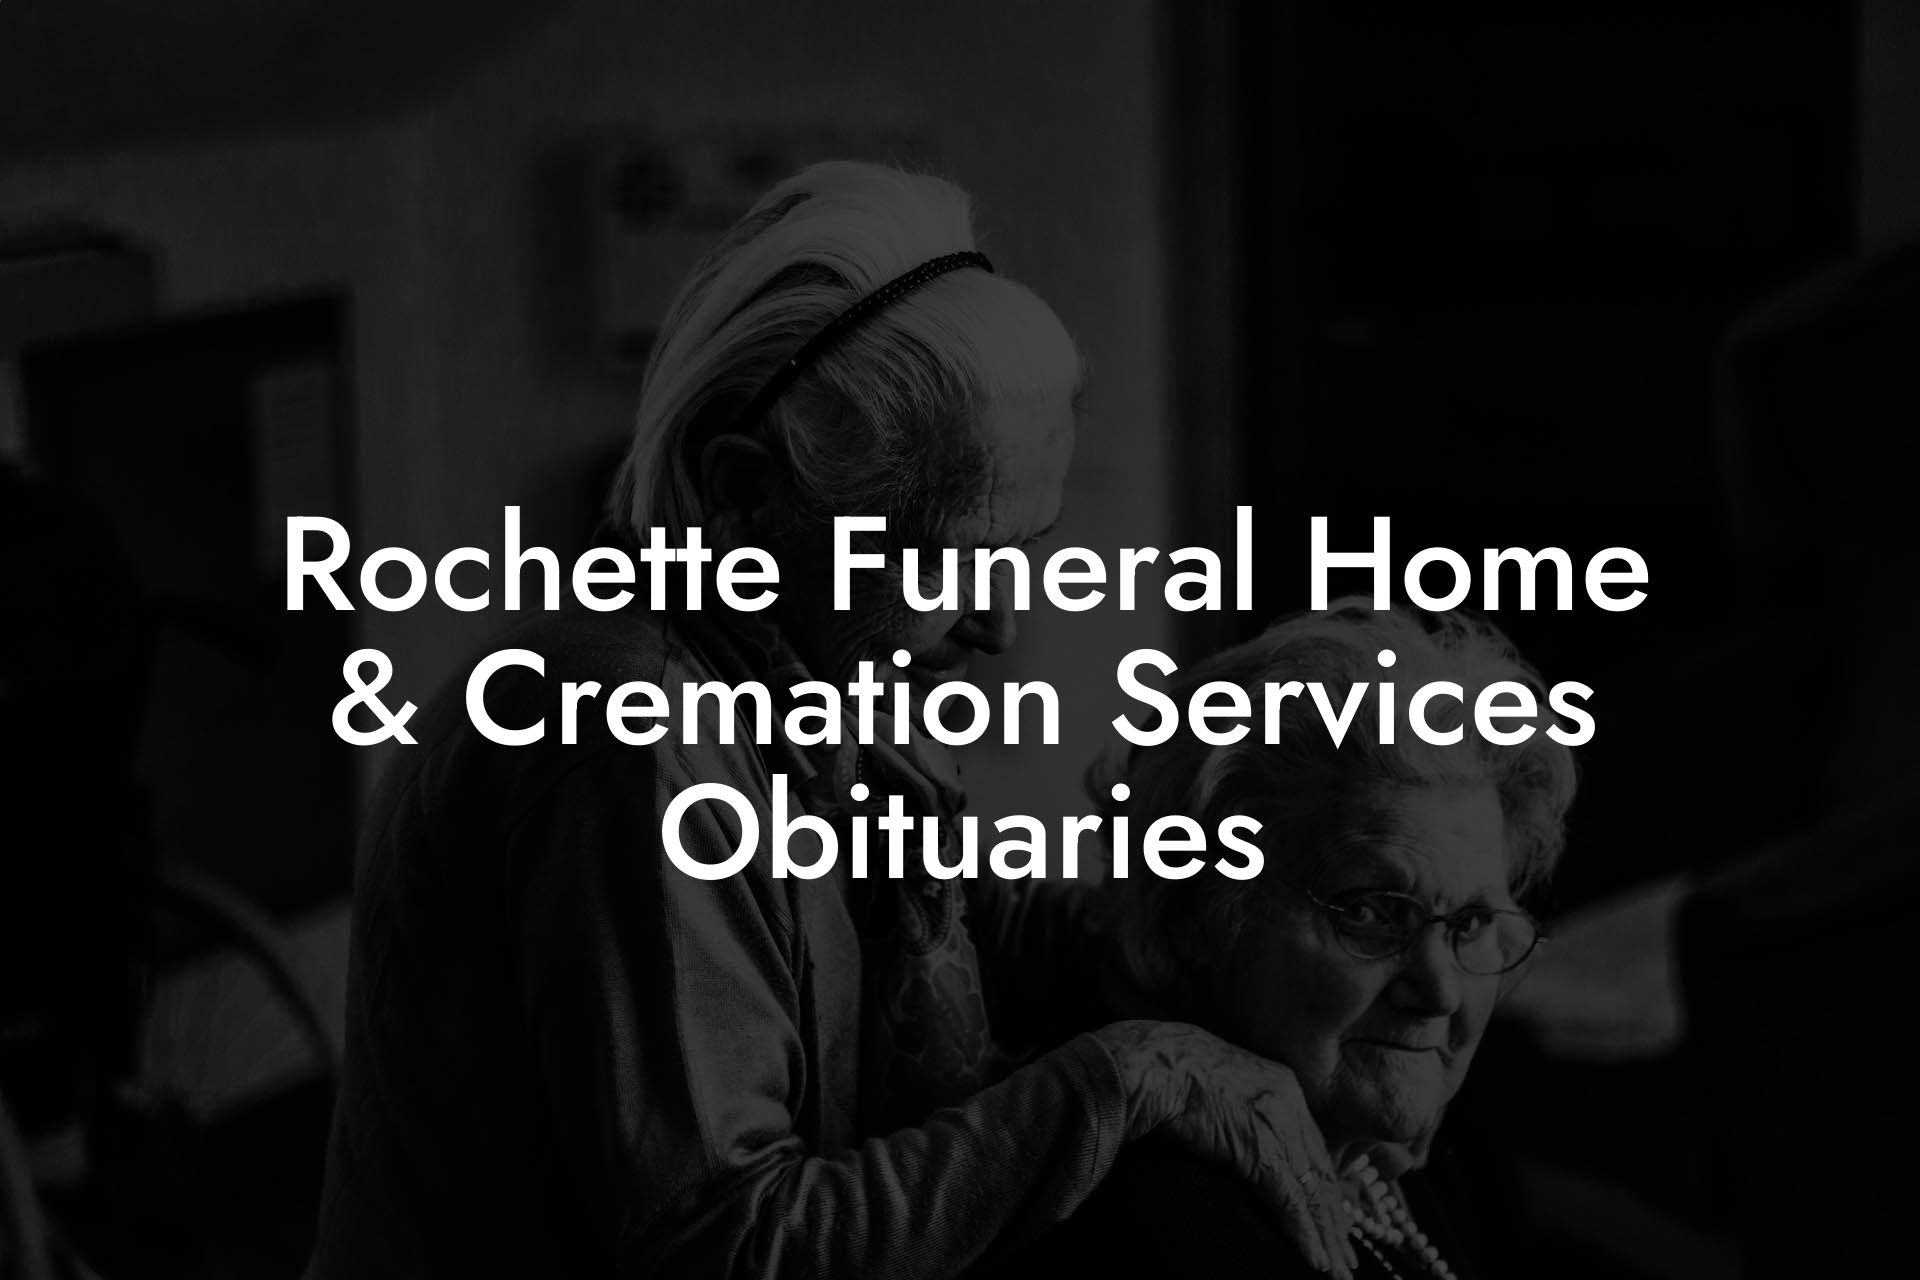 Rochette Funeral Home & Cremation Services Obituaries